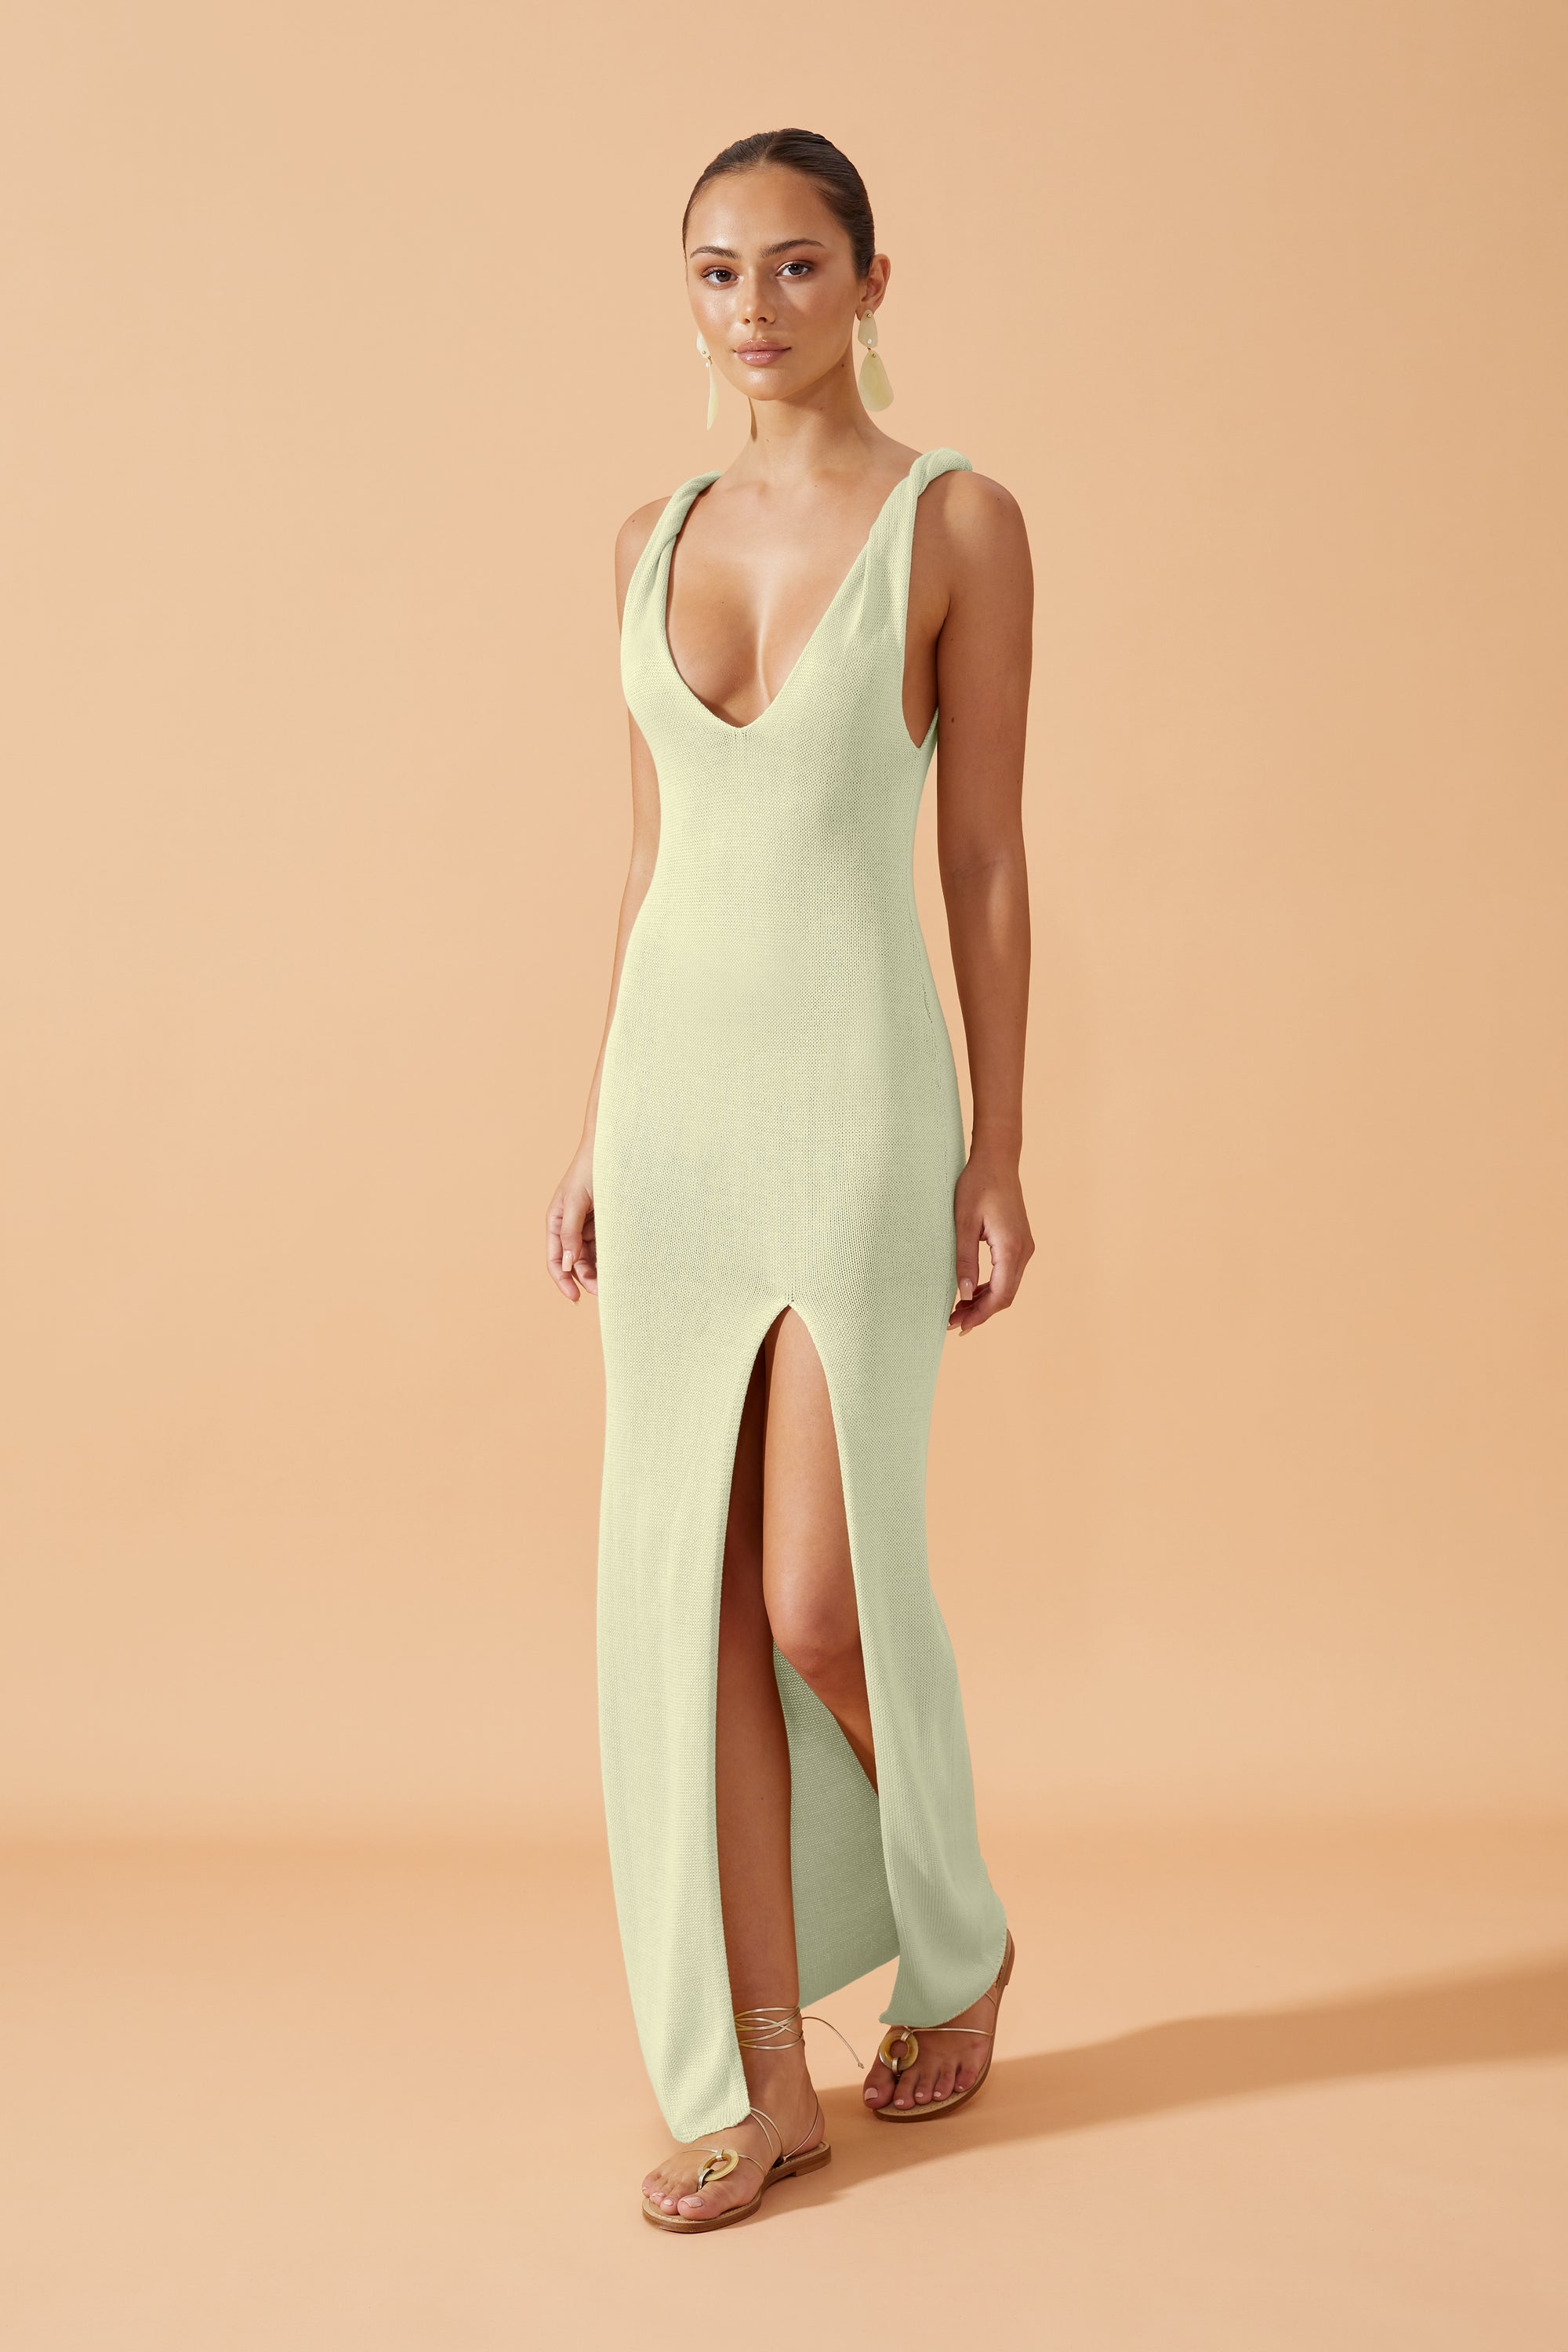 Flook The Label Anaya  Knit Long Dress with side slit in  Pistachio,  worn with drop earrings  front view